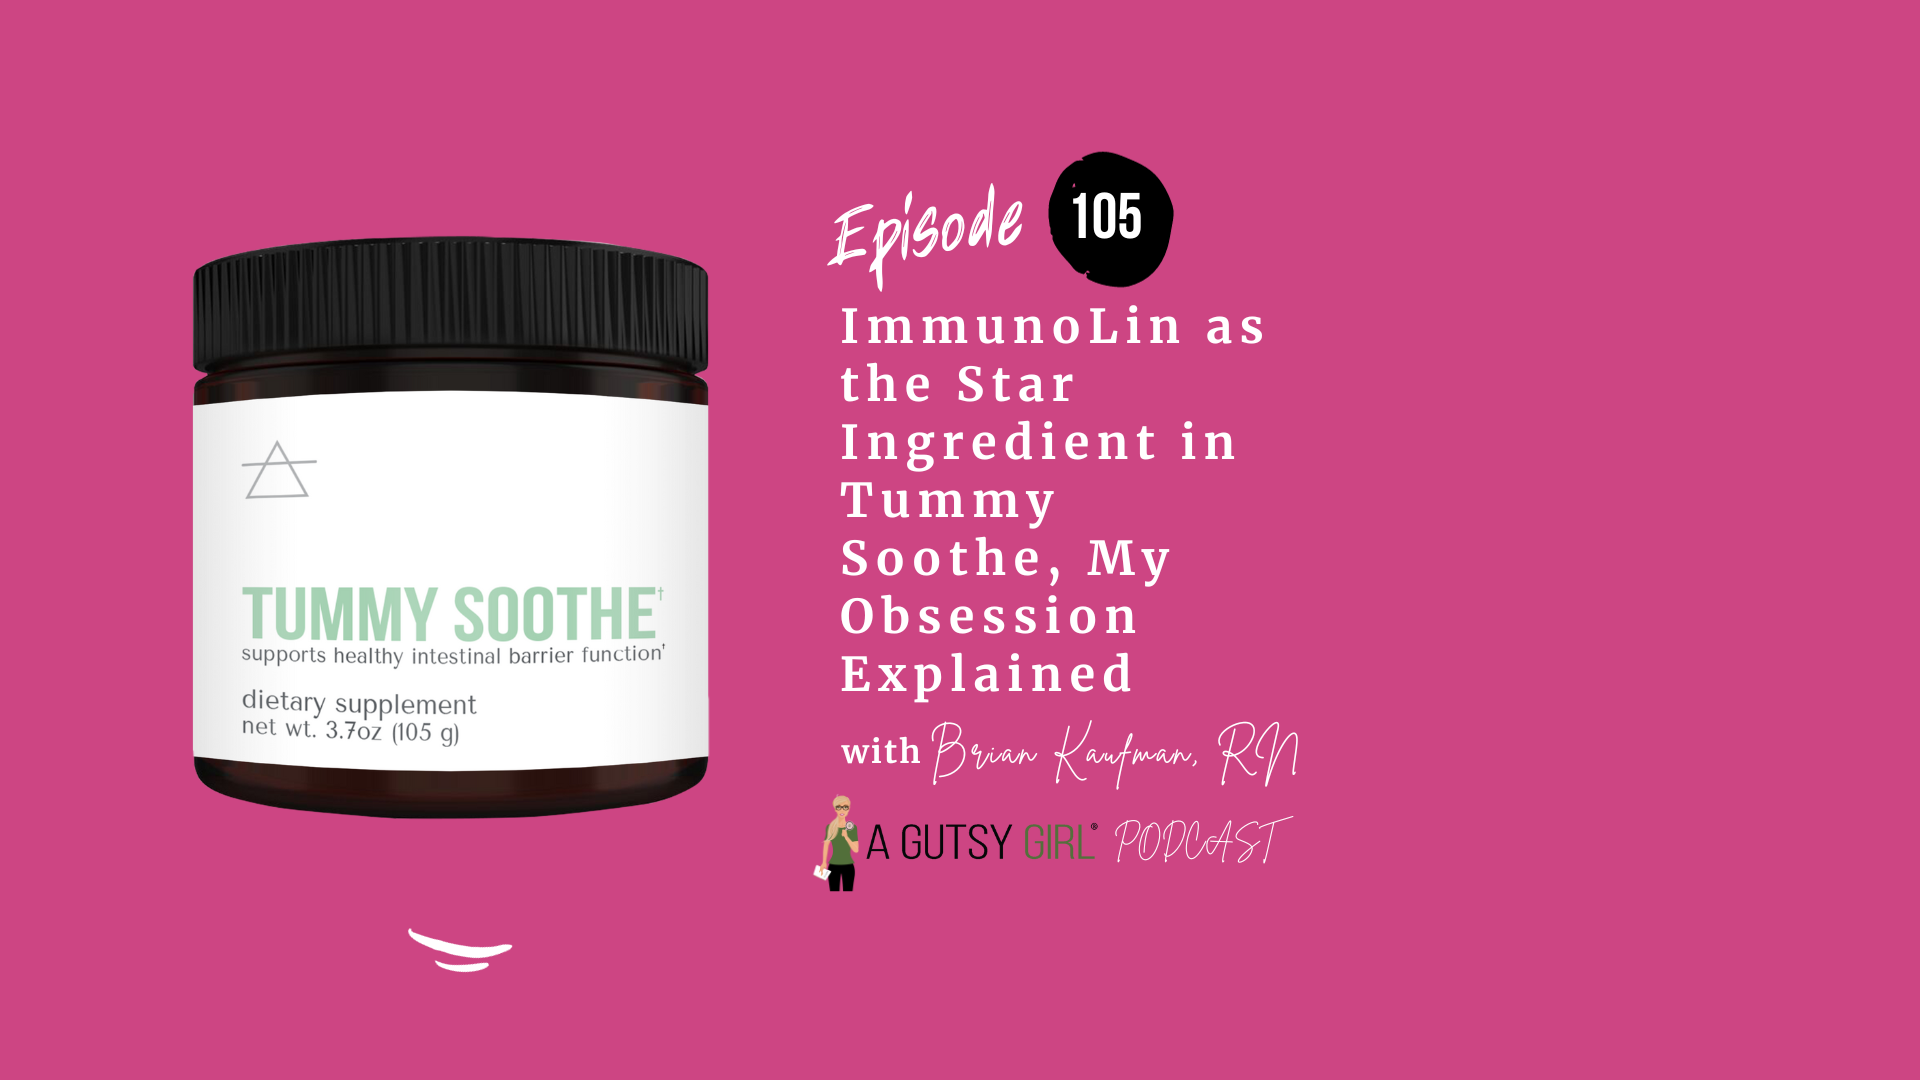 ImmunoLin as the Star Ingredient in Tummy Soothe, My Obsession Explained (Episode 105 with Brian Kaufman)